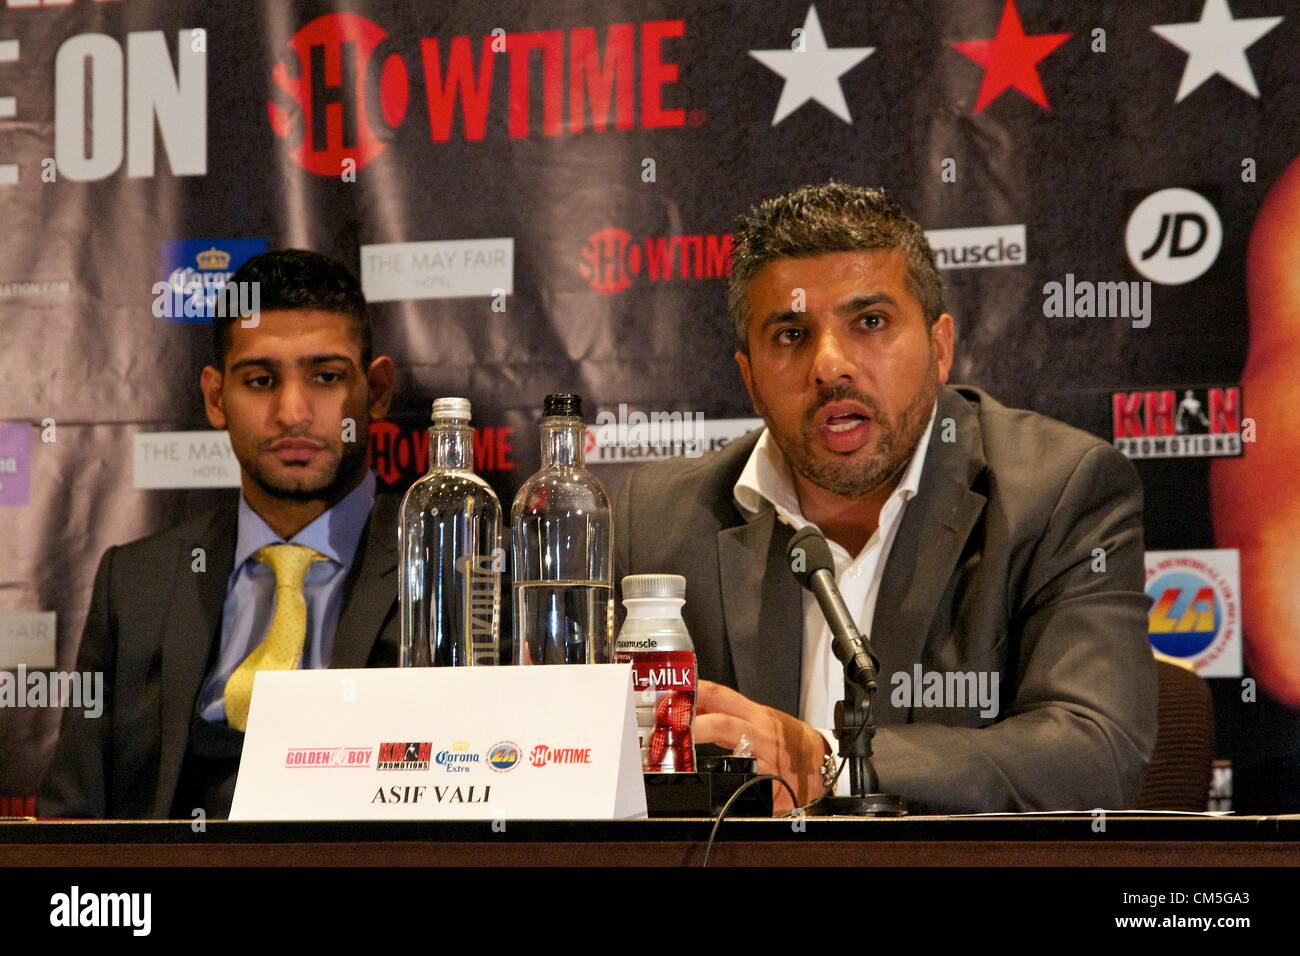 London, UK. 9th October 2012. Boxer Amir Khan with his manager Asif Vali speaking at the Mayfair Hotel in London on Tuesday October 9, 2012 to promote his December 15 bout against Carlos Molina in Los Angeles.  Credit:  Paul McCabe / Alamy Live News Stock Photo